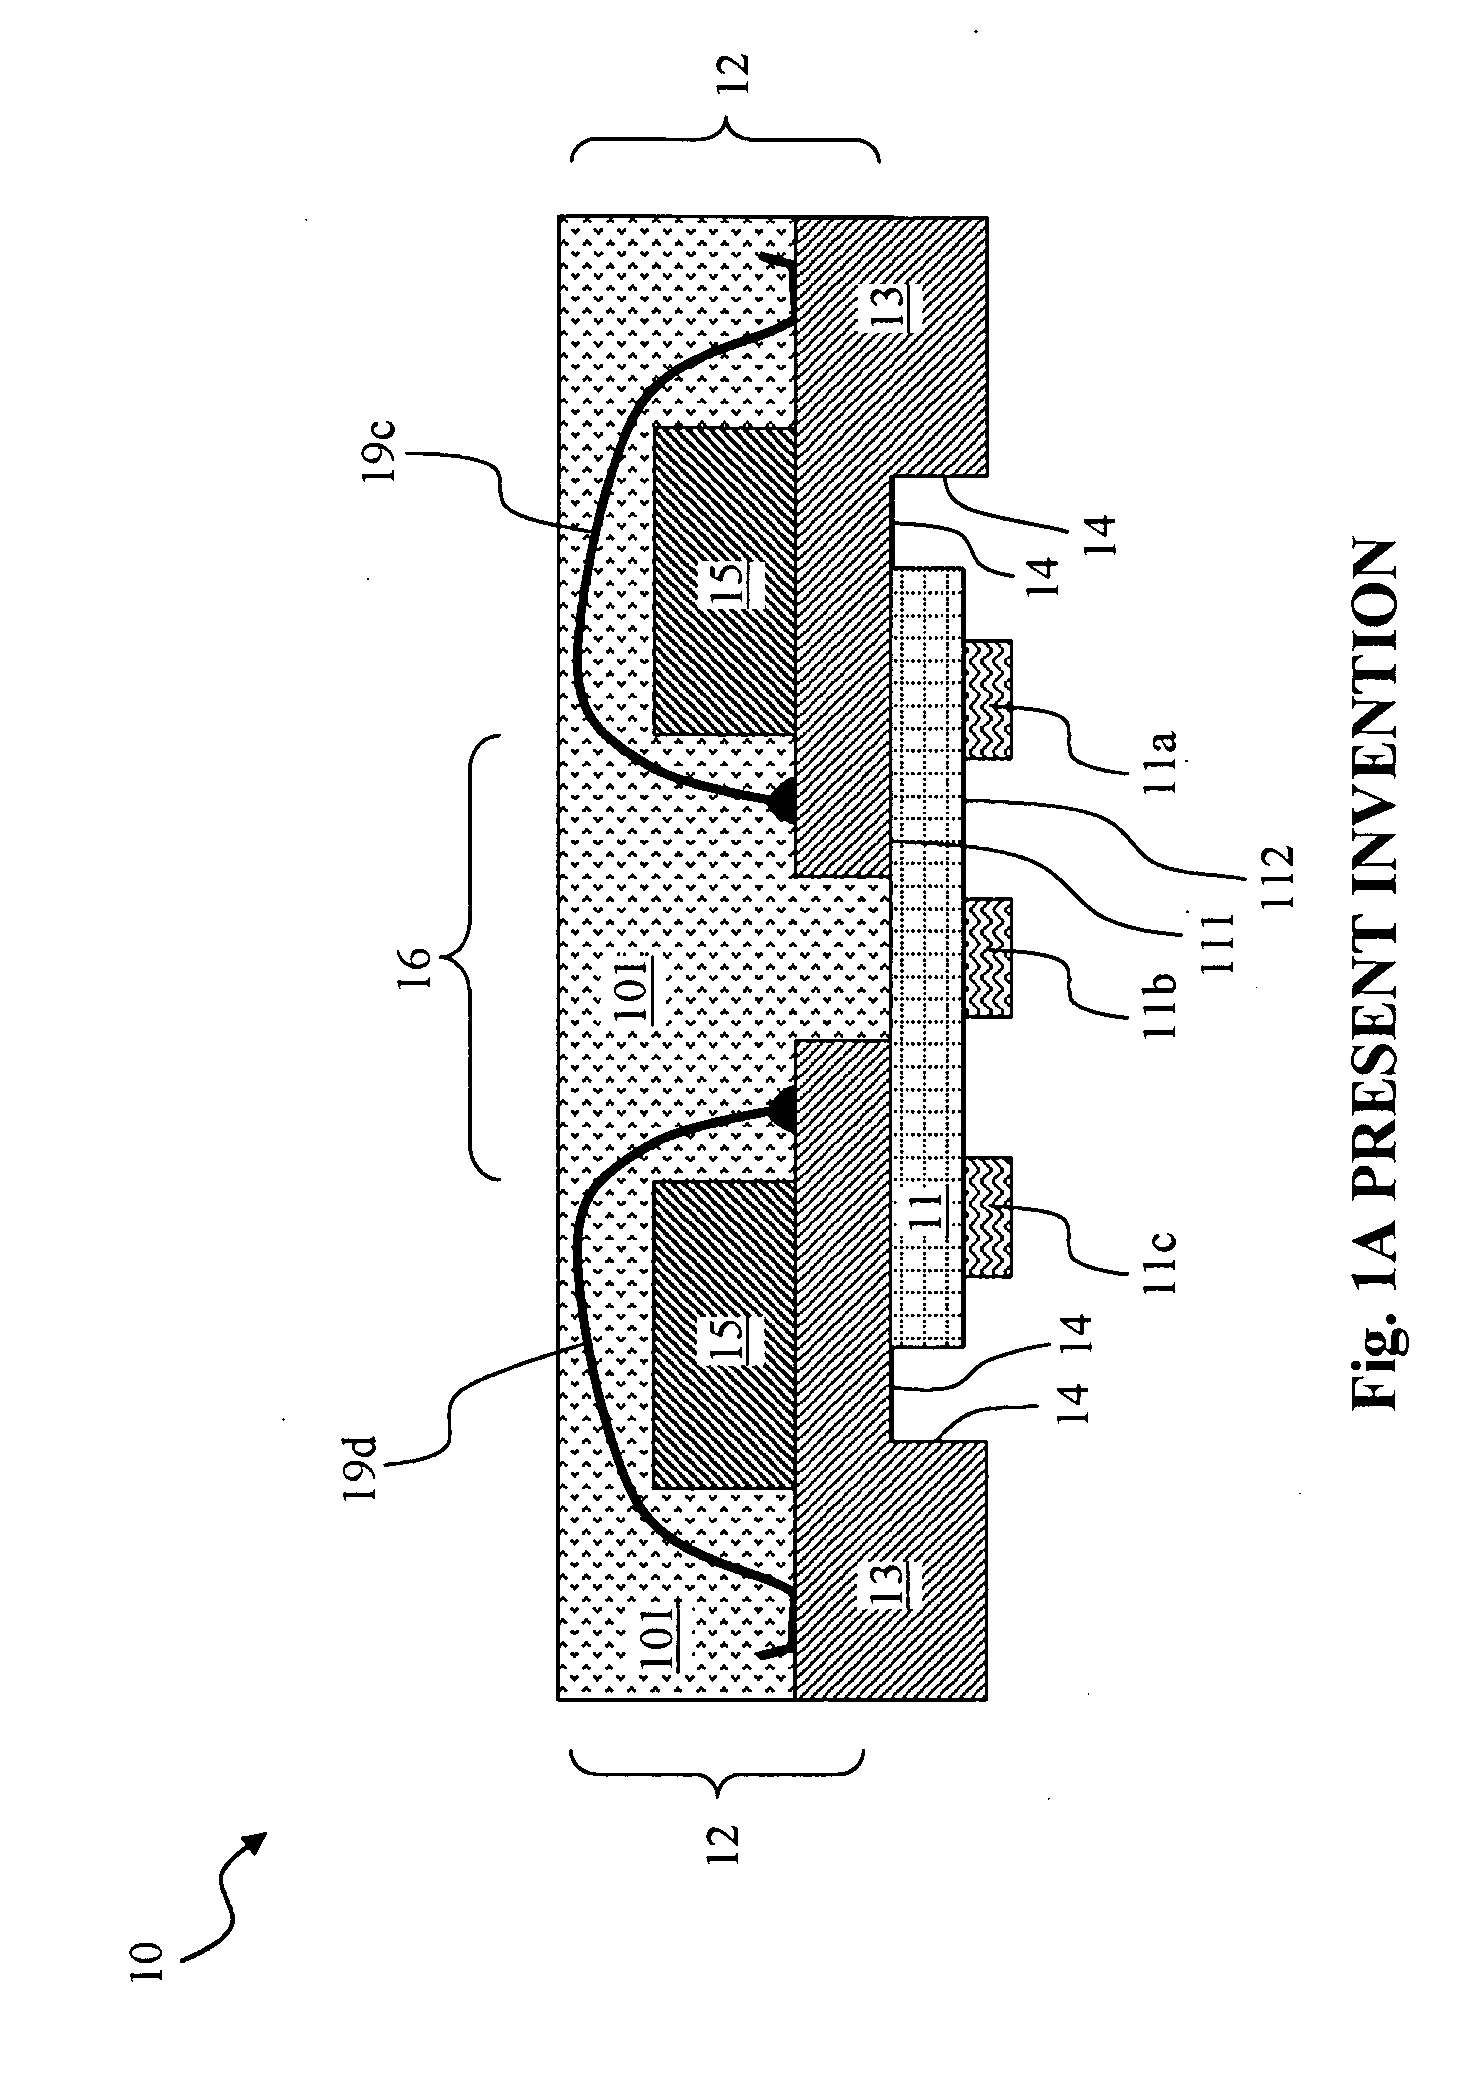 Compact Power Semiconductor Package and Method with Stacked Inductor and Integrated Circuit Die